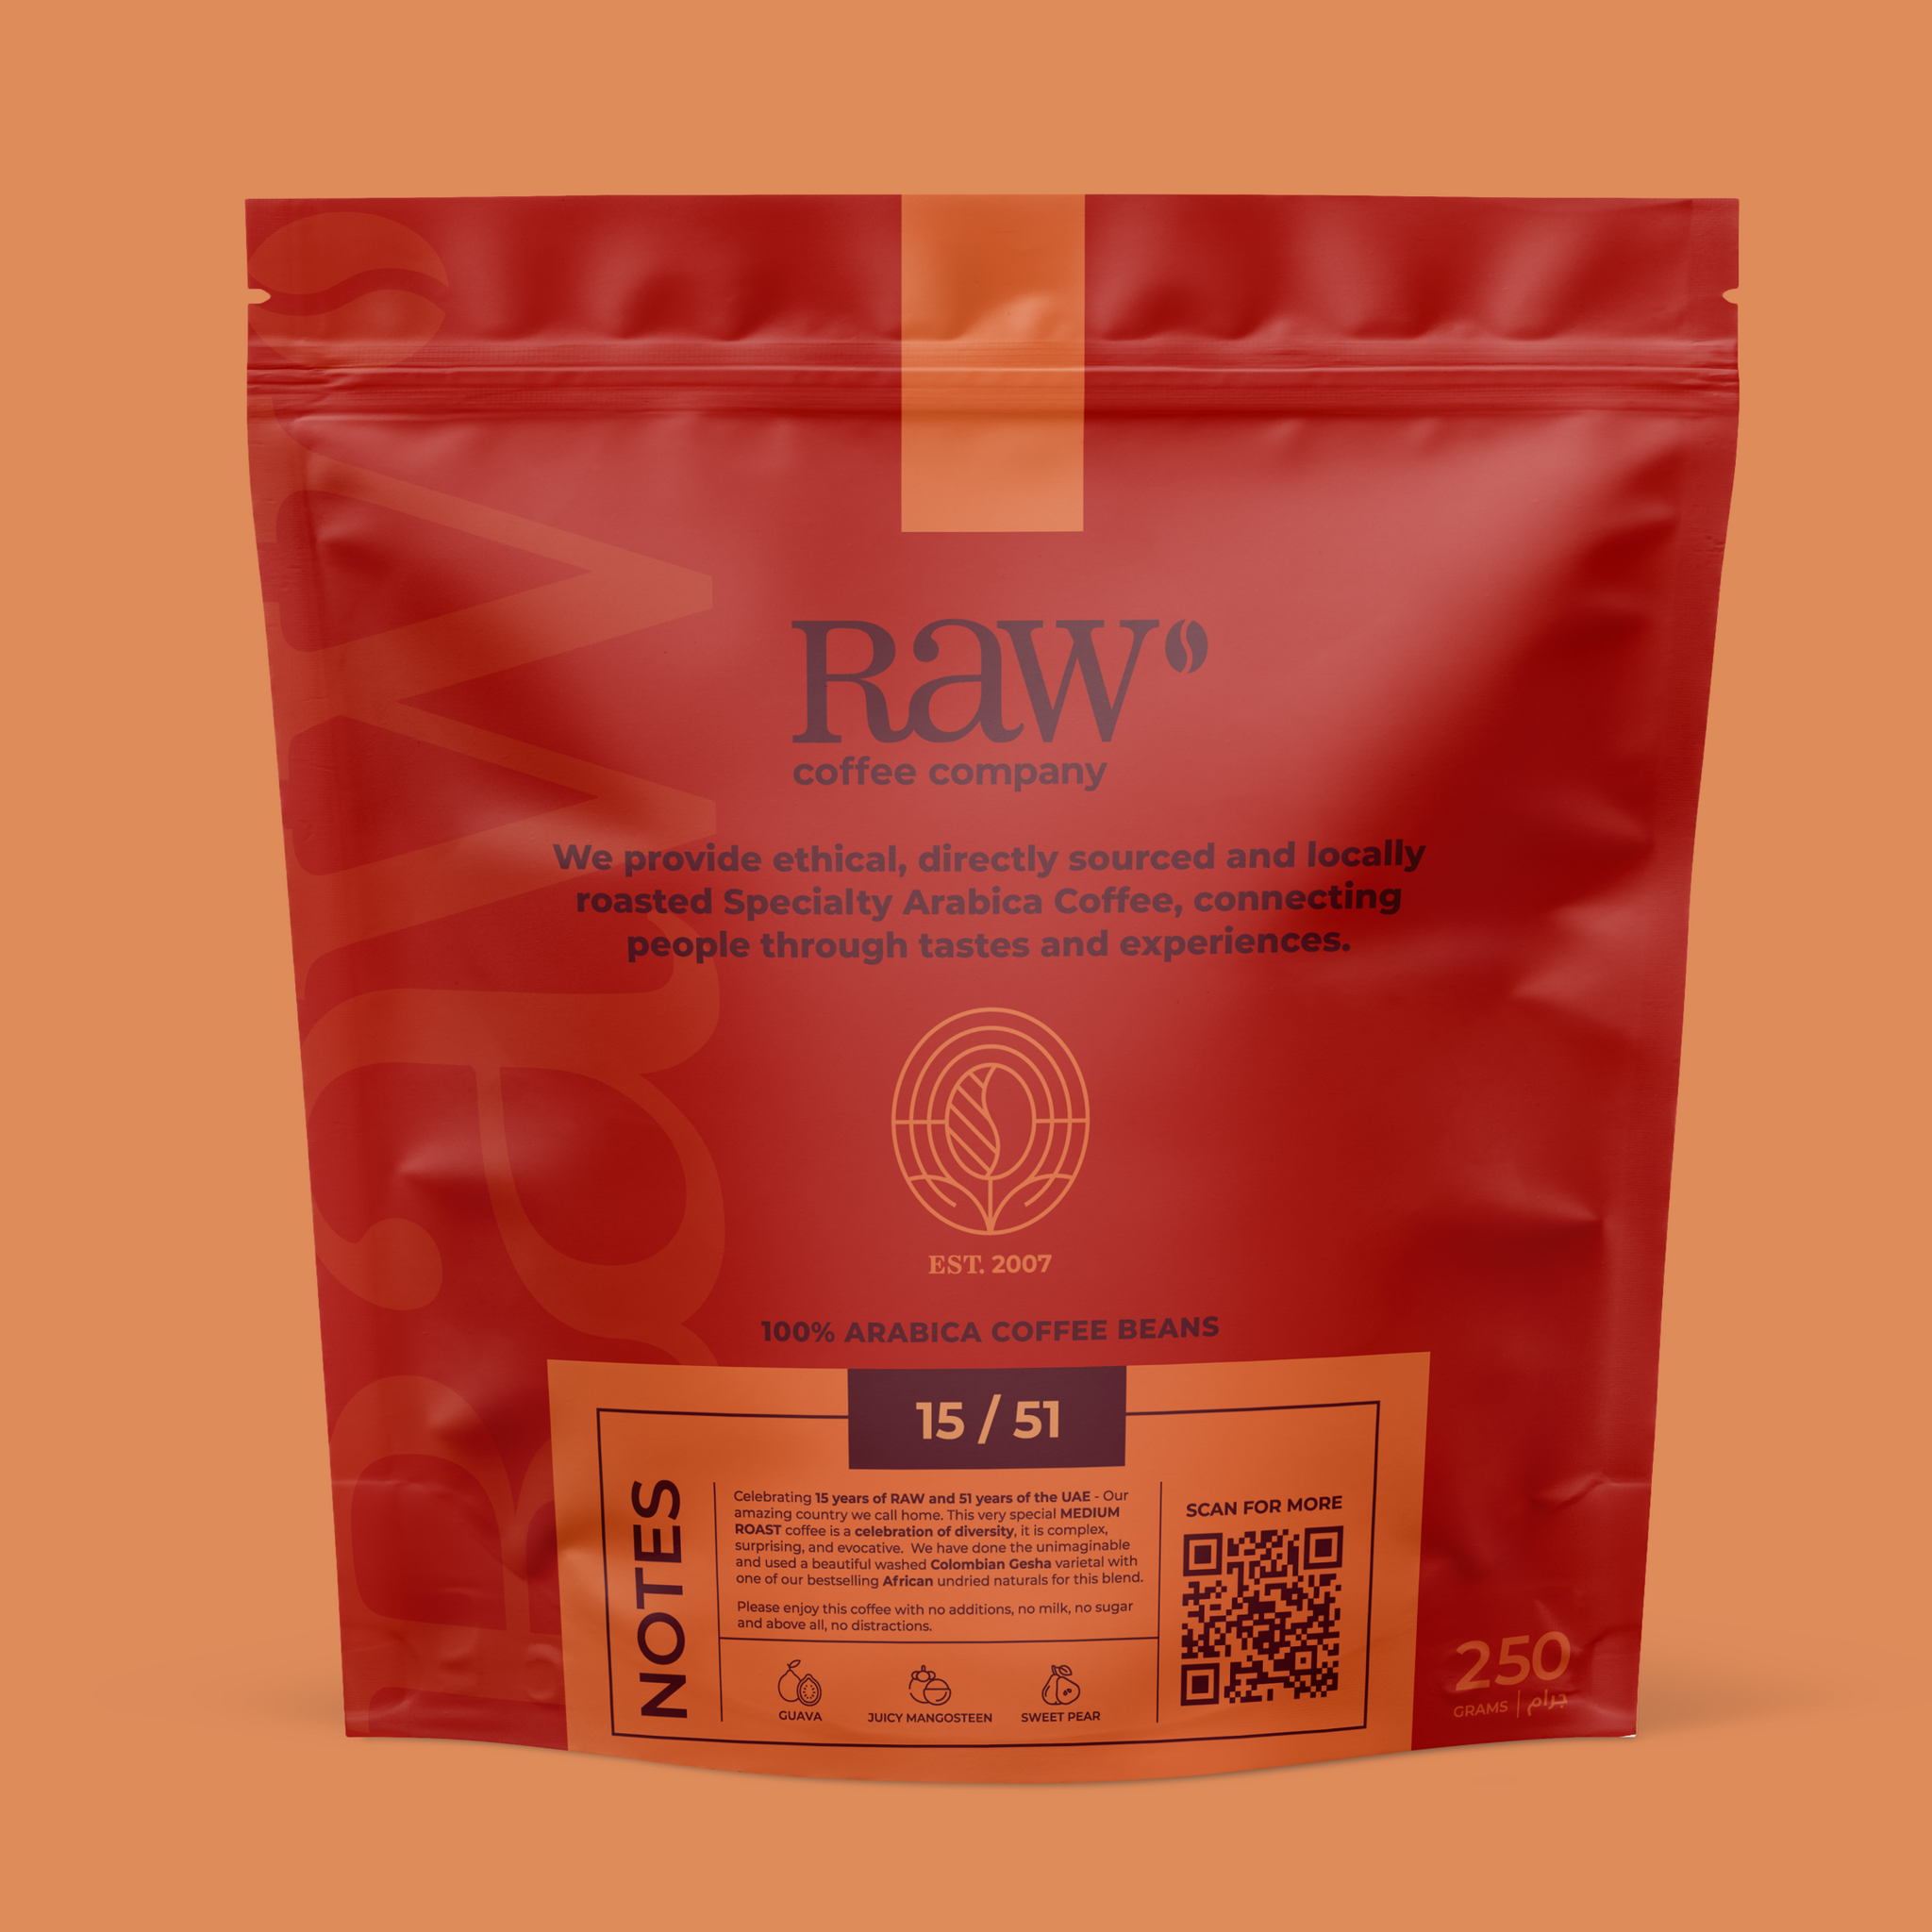 <B>INTRODUCING OUR NEW BLEND: THE 15/51 BLEND</B>